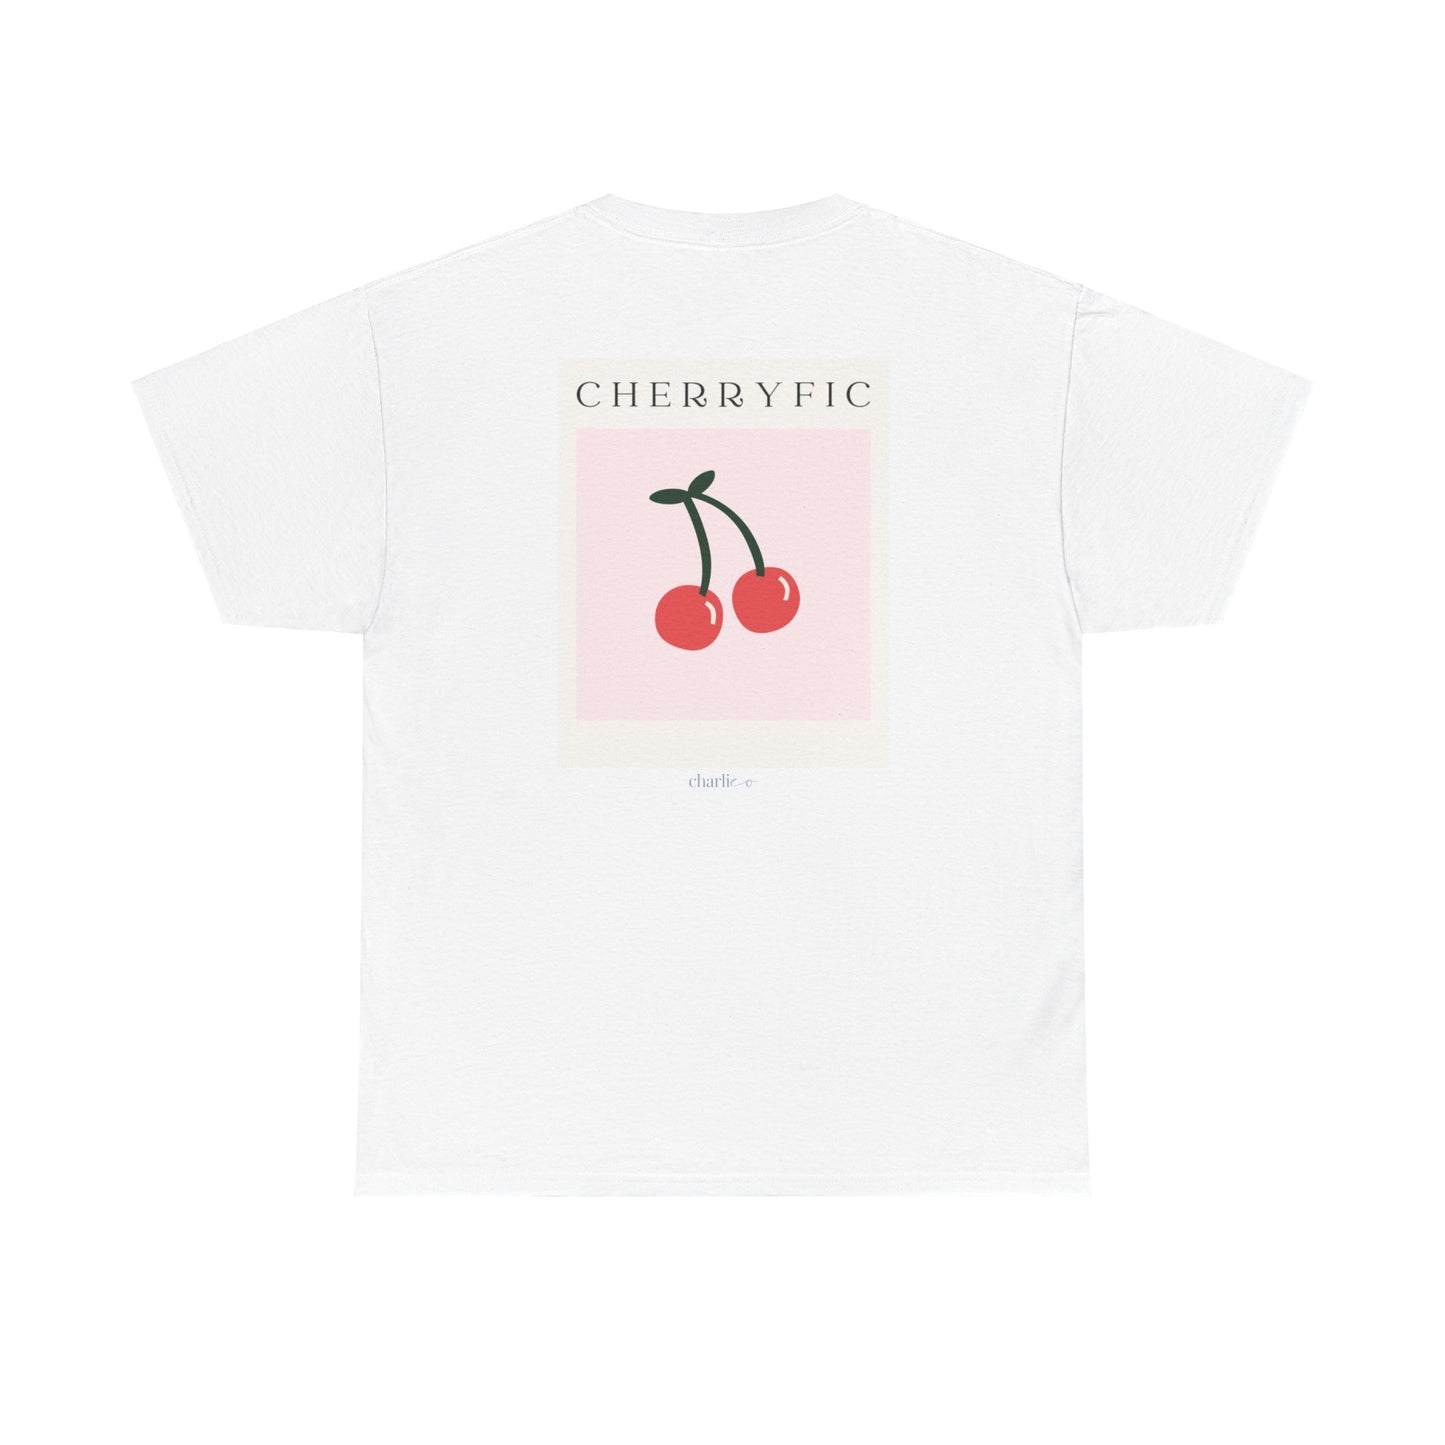 Short-sleeved t-shirt with unisex print -CHERRYFIC- for adults